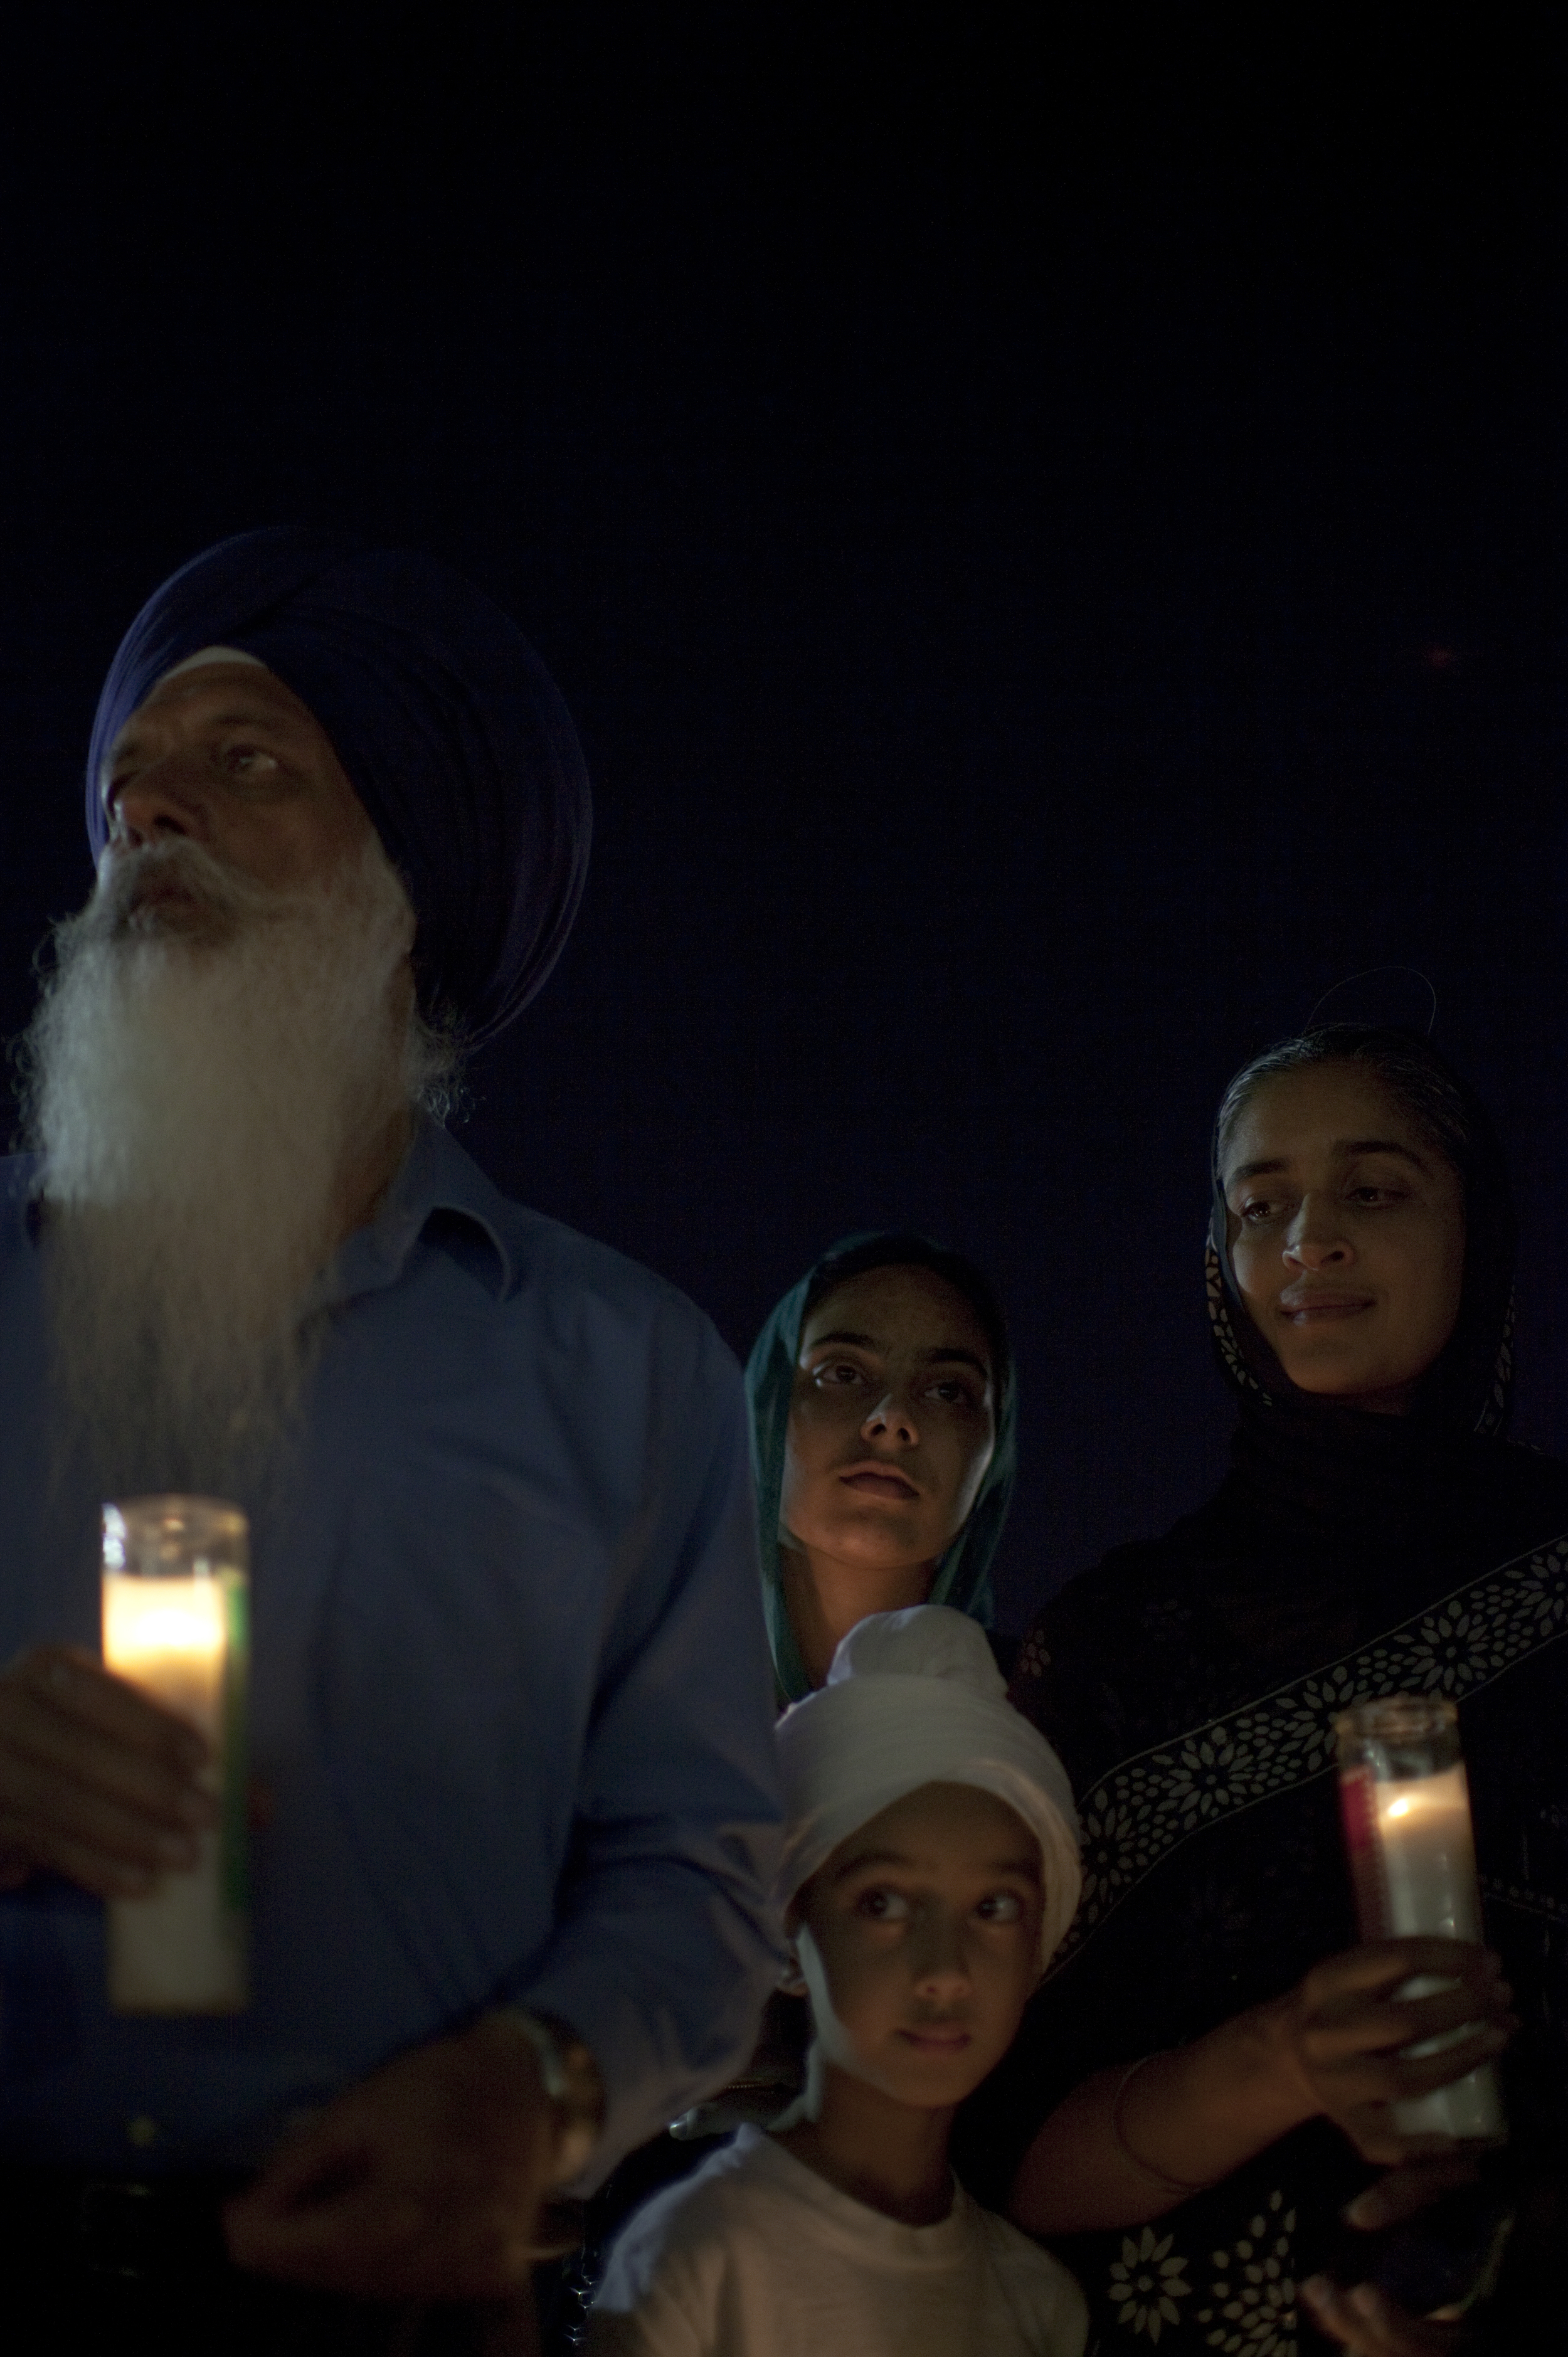  A family of the Sikh faith gathered at a candlelight vigil for six&nbsp;worshipers who were shot and killed&nbsp;at&nbsp;a Temple in Wisconsin by a white supremacist. 